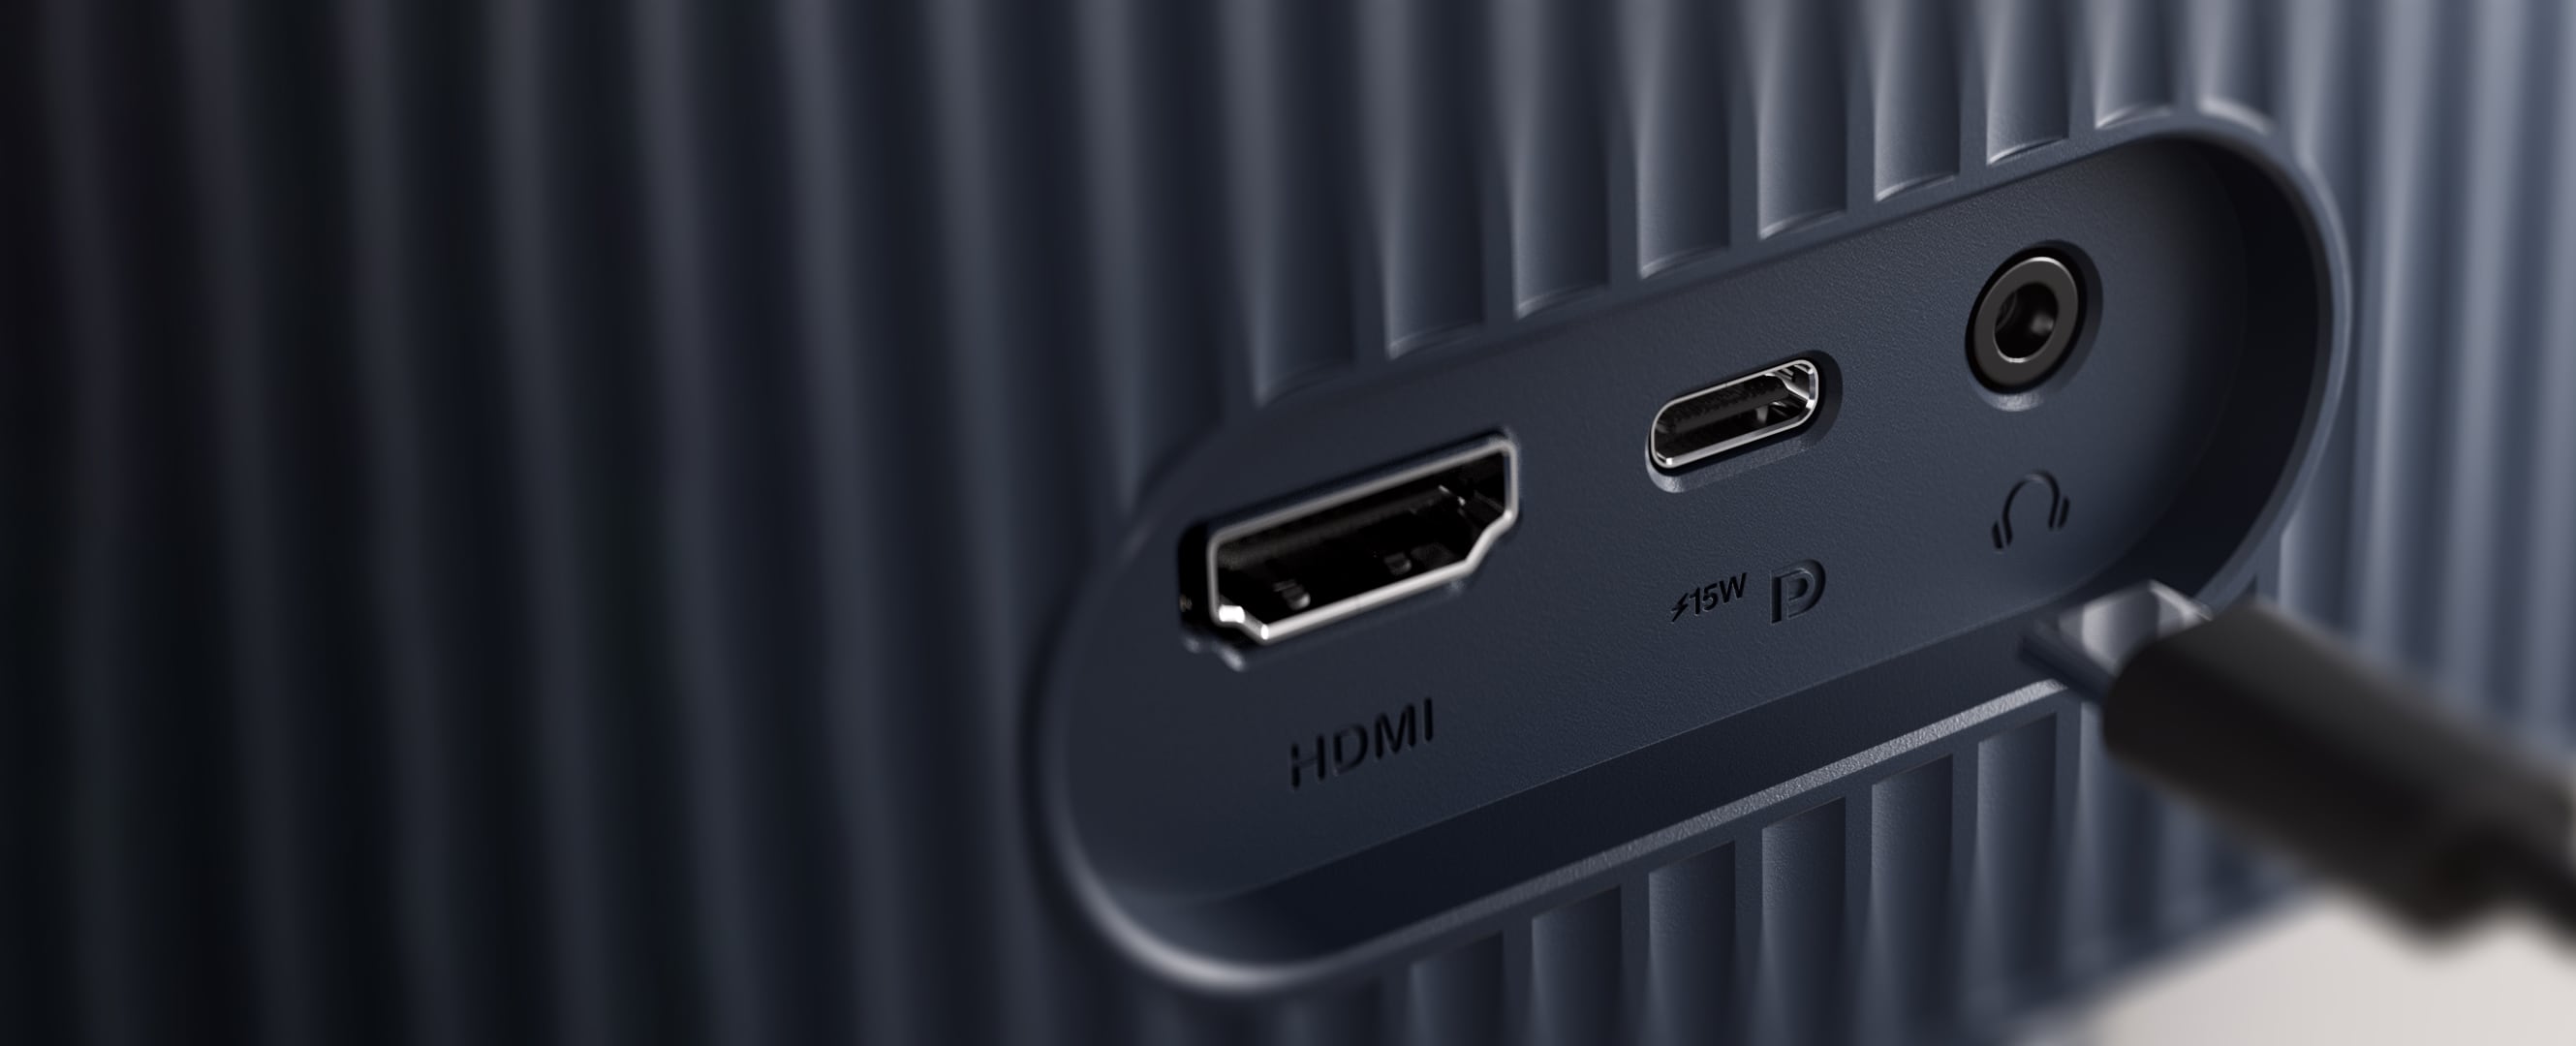 The image shows the VU monitor's HDMI and USB-C ports, as well as the headphone jack.